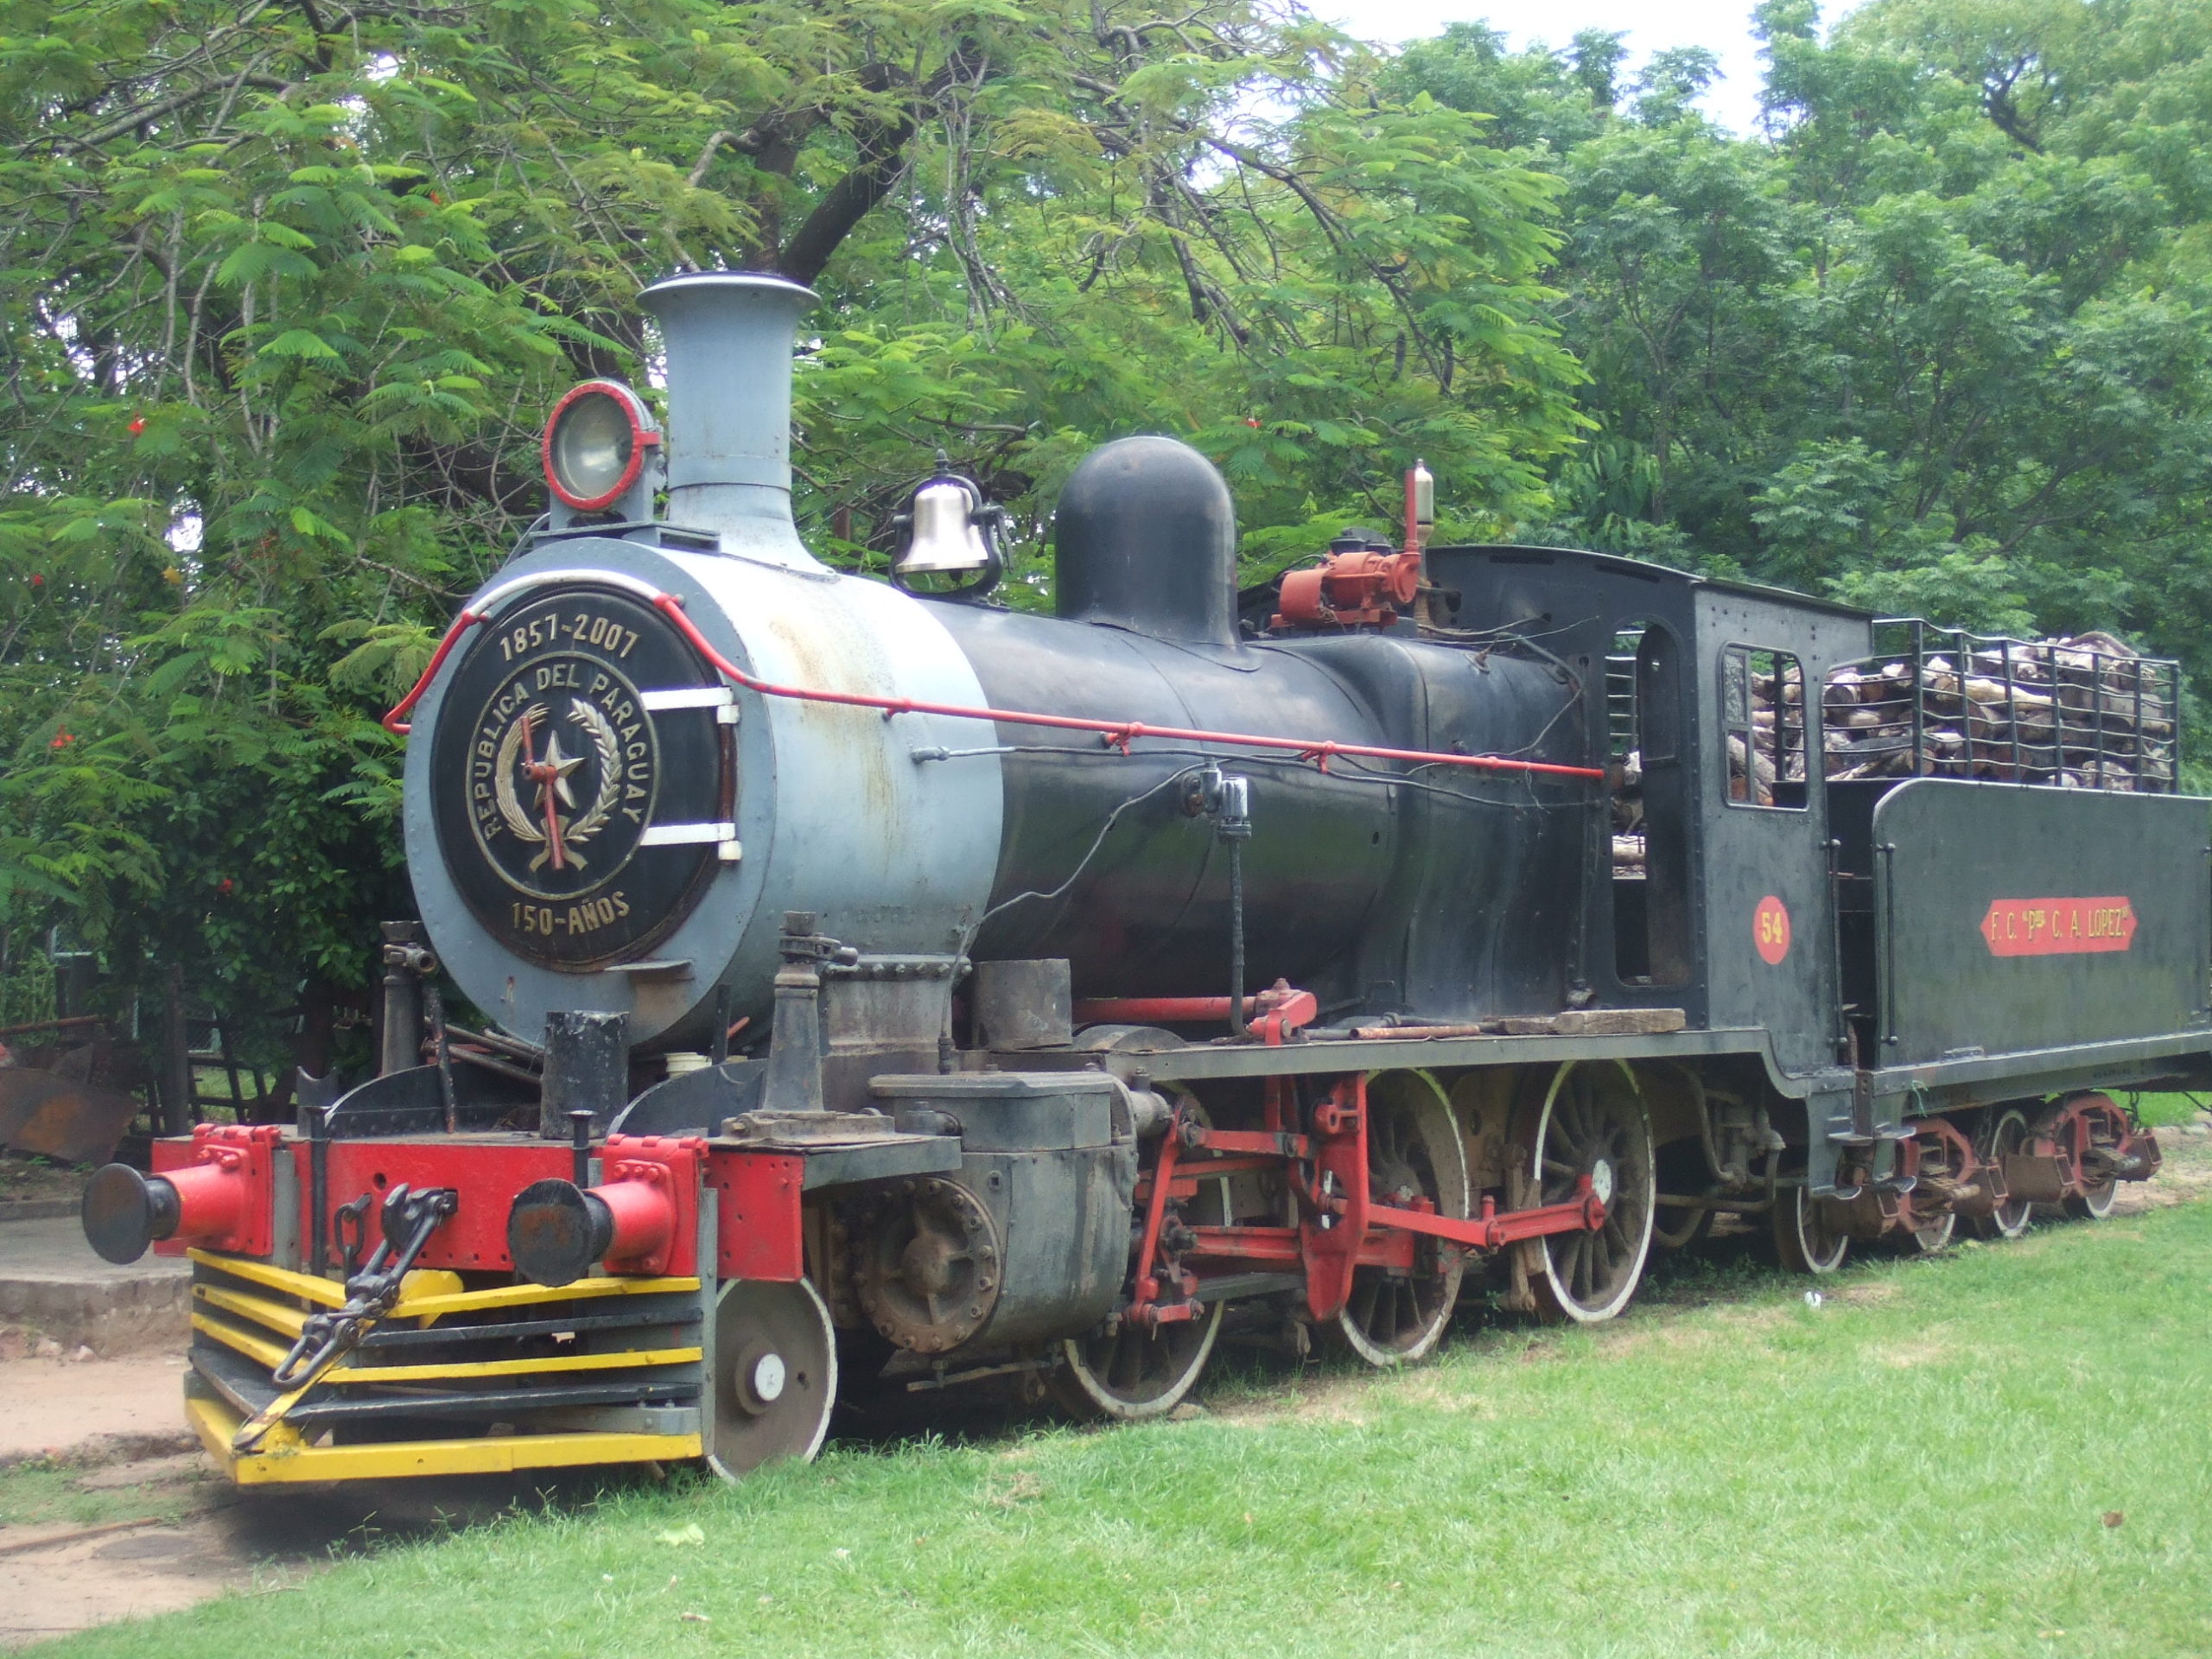 The steam trains of Paraguay